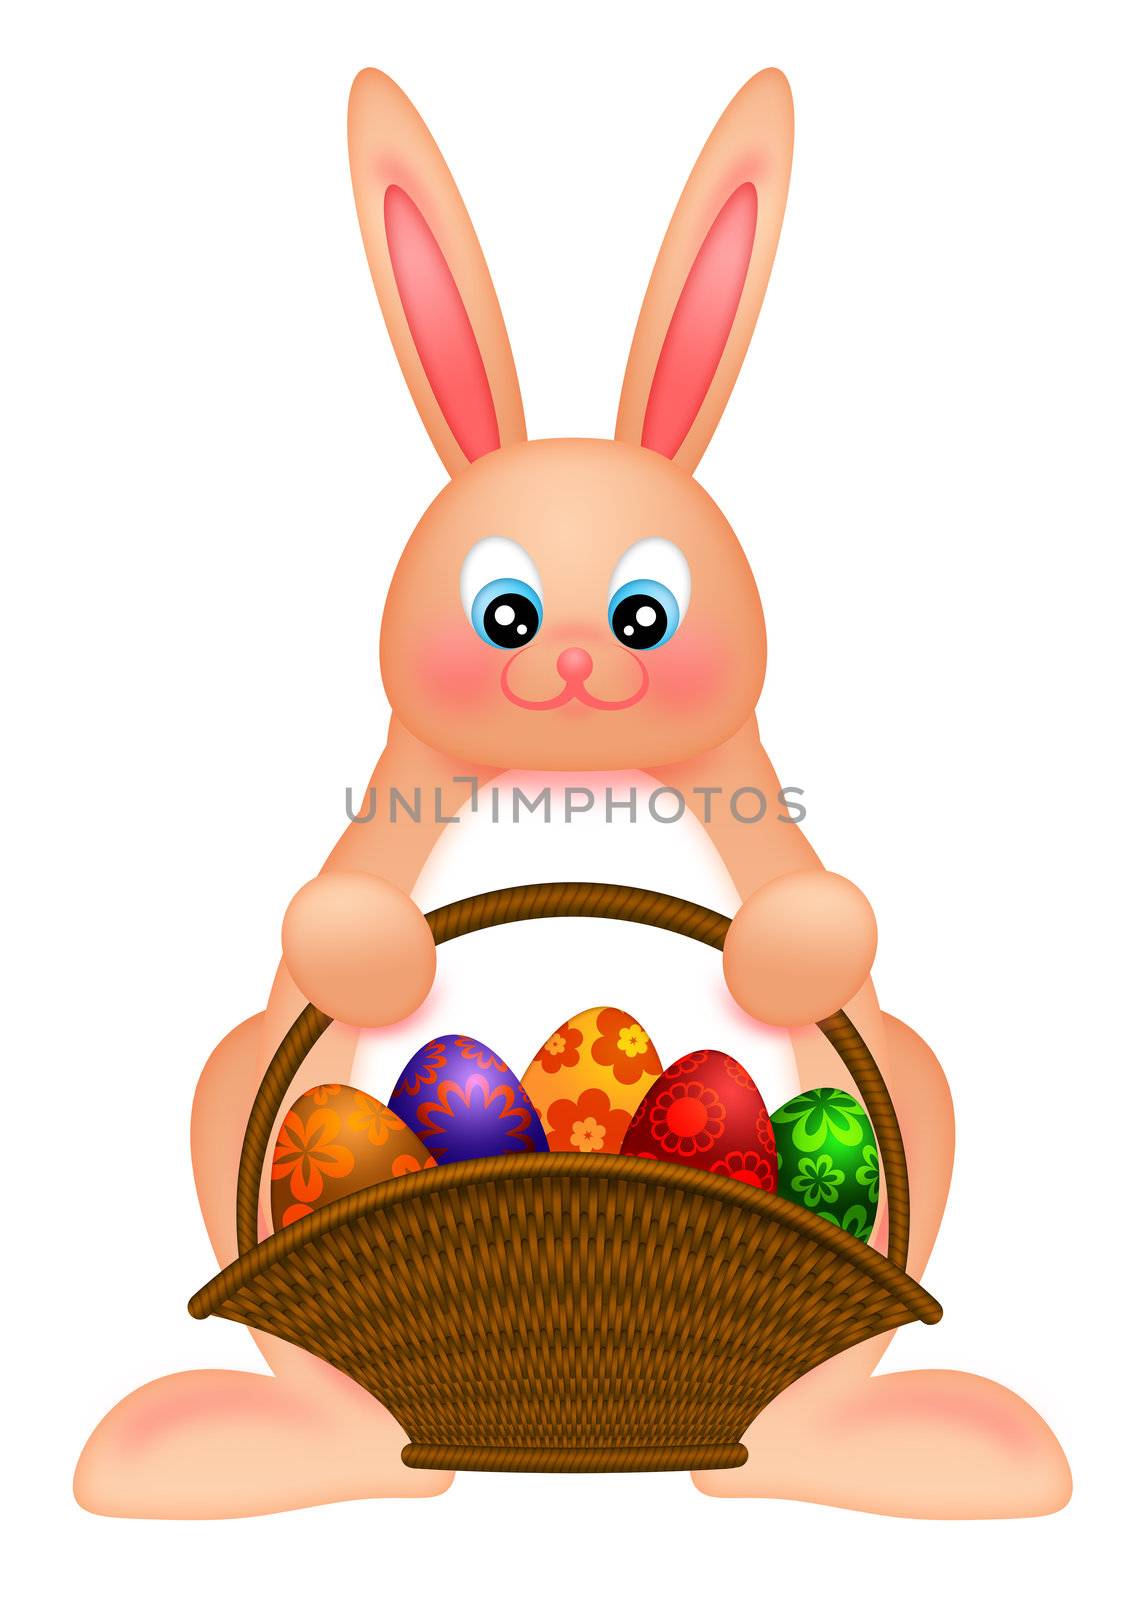 Happy Easter Bunny Rabbit Holding a Basket of Colorful Eggs Illustration Isolated on White Background